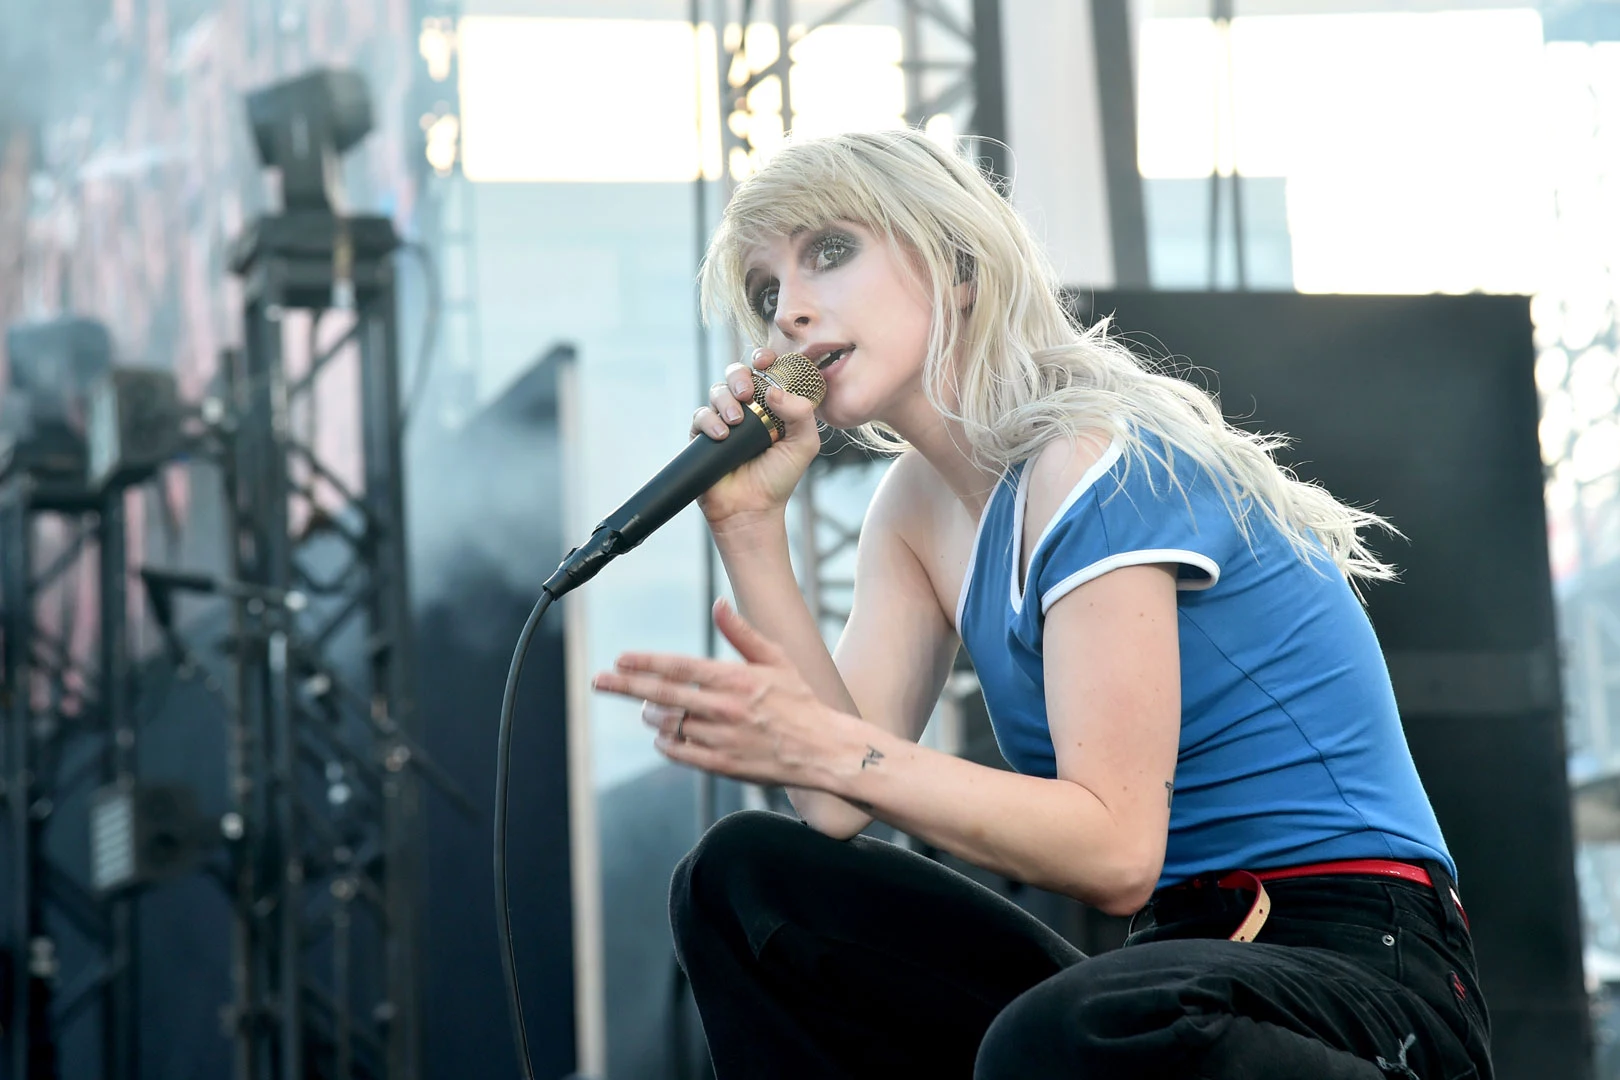 Hayley Williams reveals forthcoming B-side is an unreleased song from  Paramore's After Laughter era